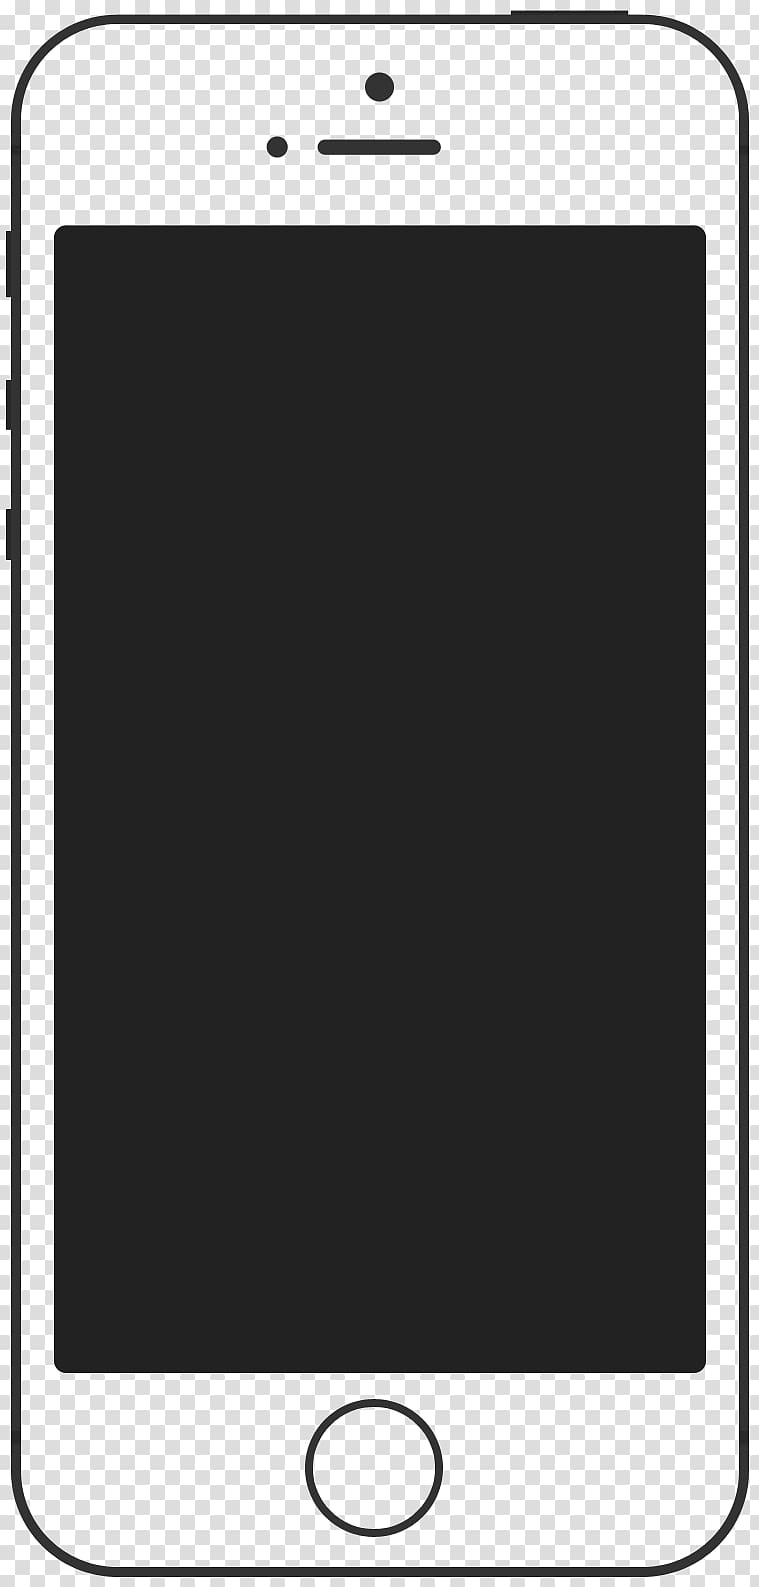 Smartphone iPhone , smartphone transparent background PNG clipart